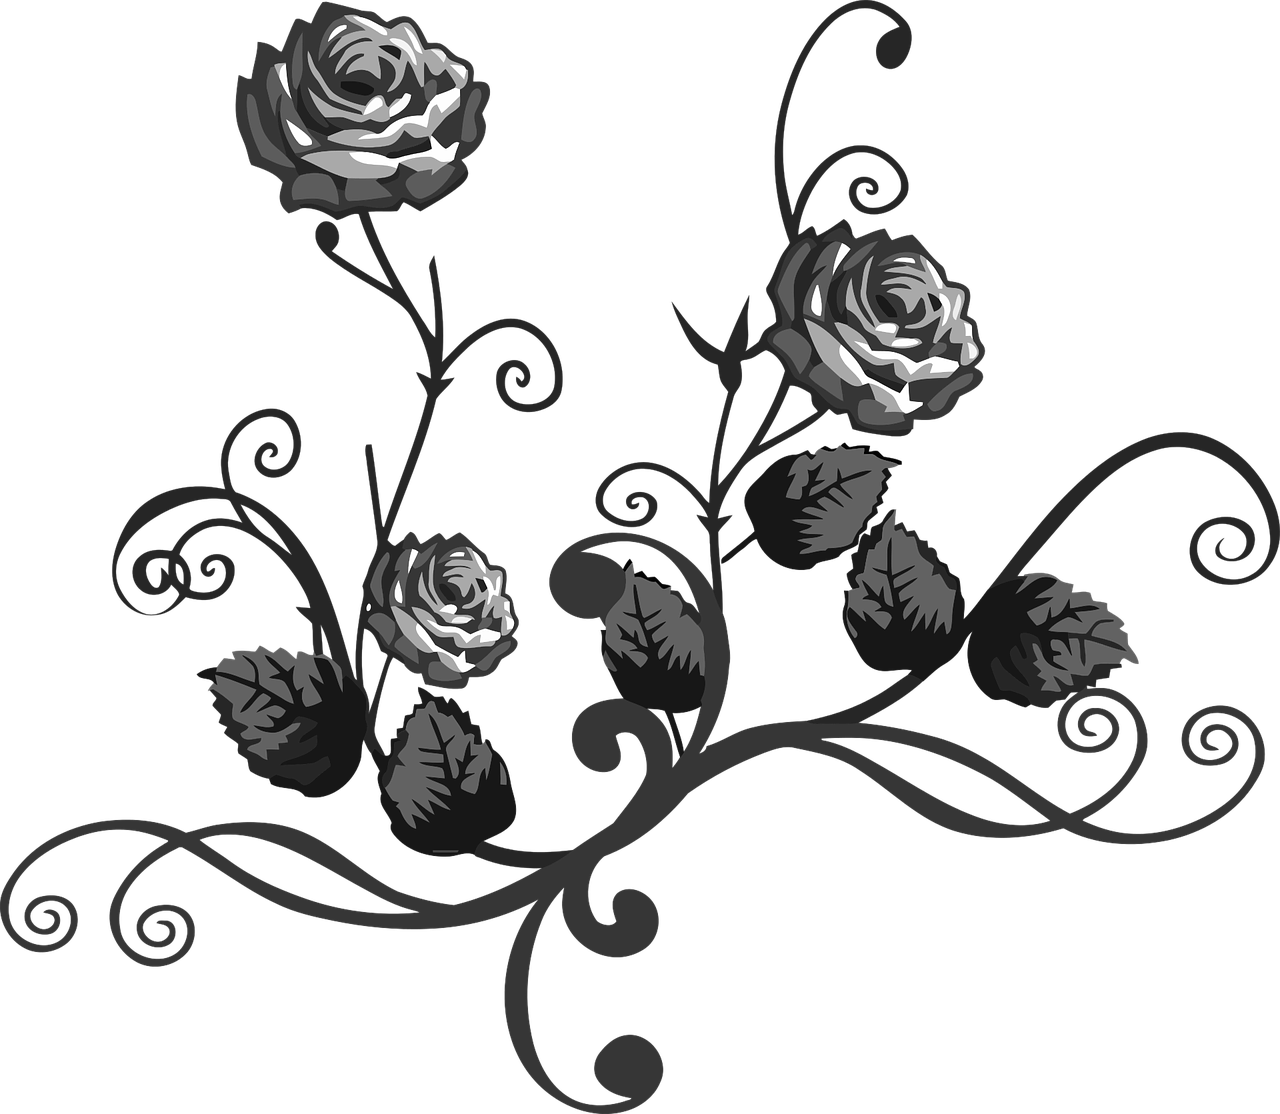 a black and white image of two roses, an ambient occlusion render, deviantart, art nouveau, stylized material bssrdf, vines, black ambient background, imvu